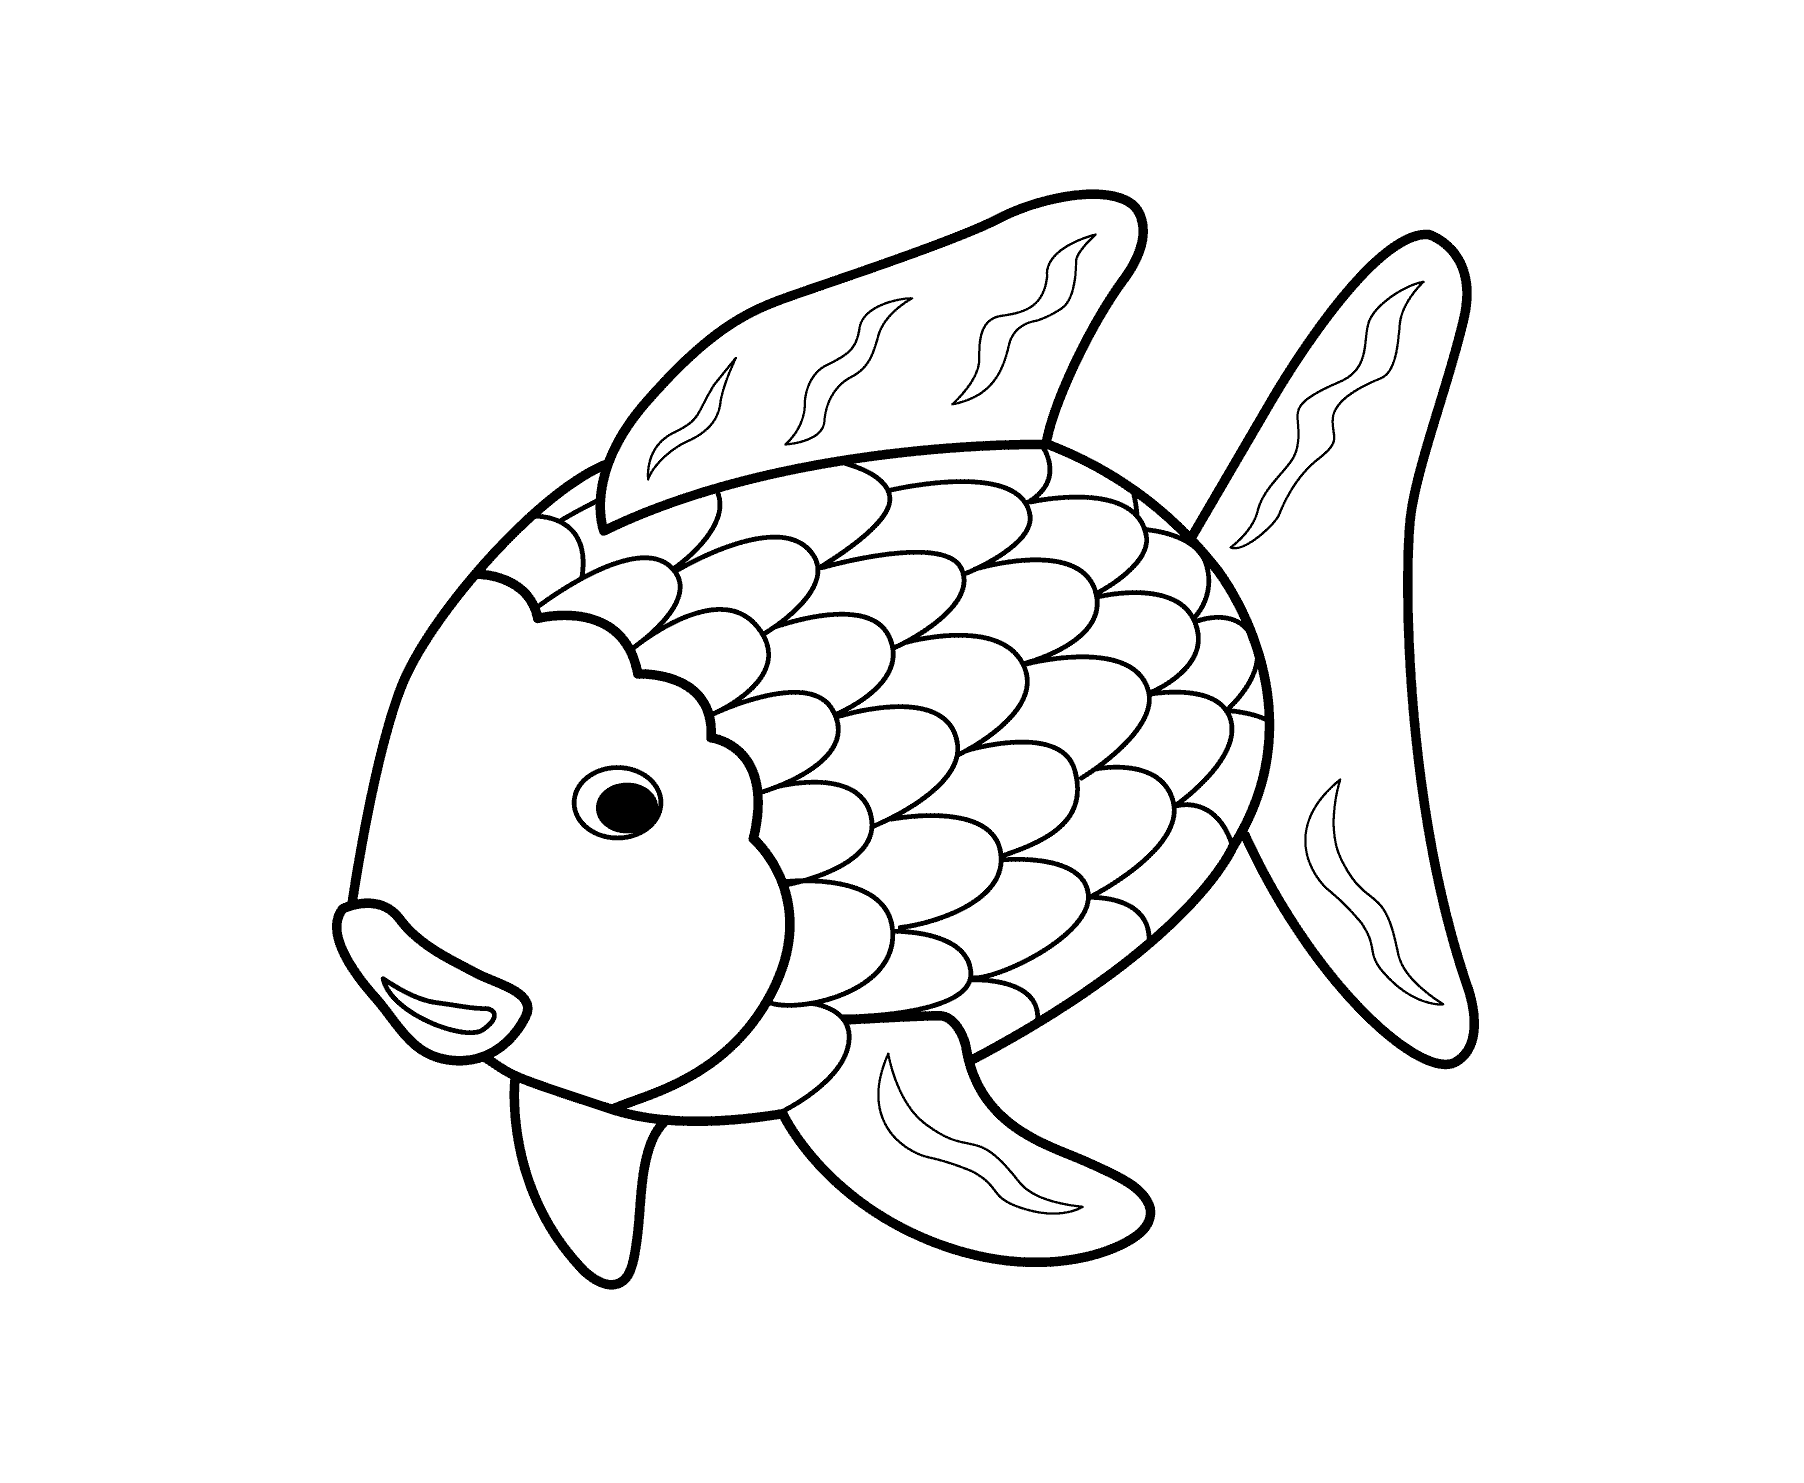 picture of fish to color simple fish coloring pages download and print for free to fish picture of color 